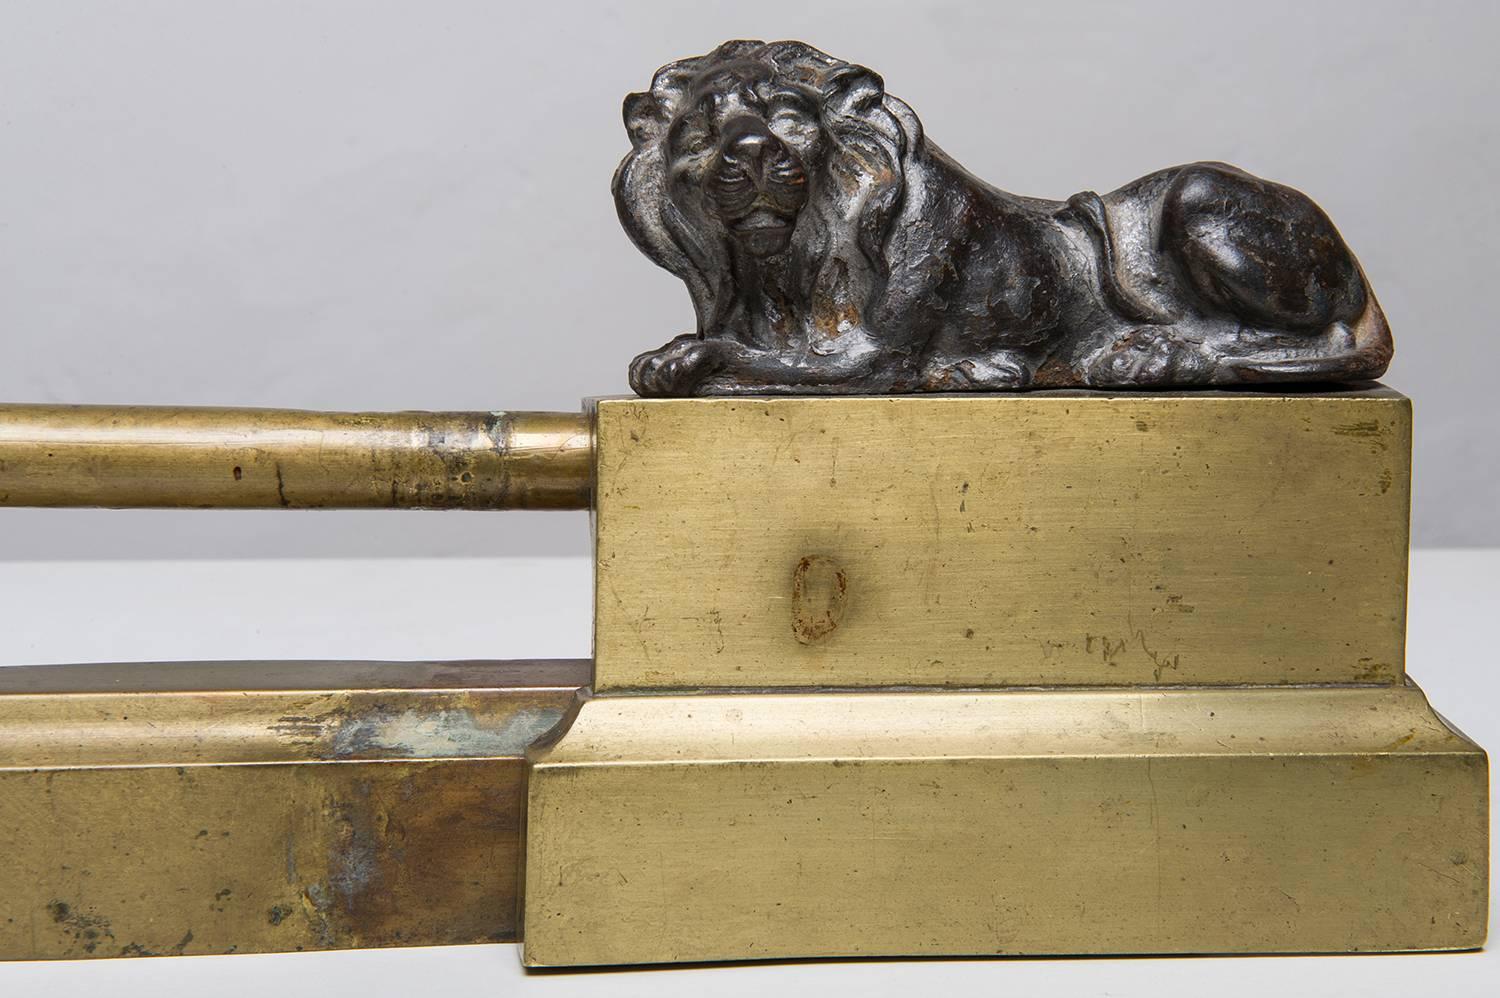 Antique French fireplace fender with bronze lions: simple and elegant in front of the fireplace.
O/4757.